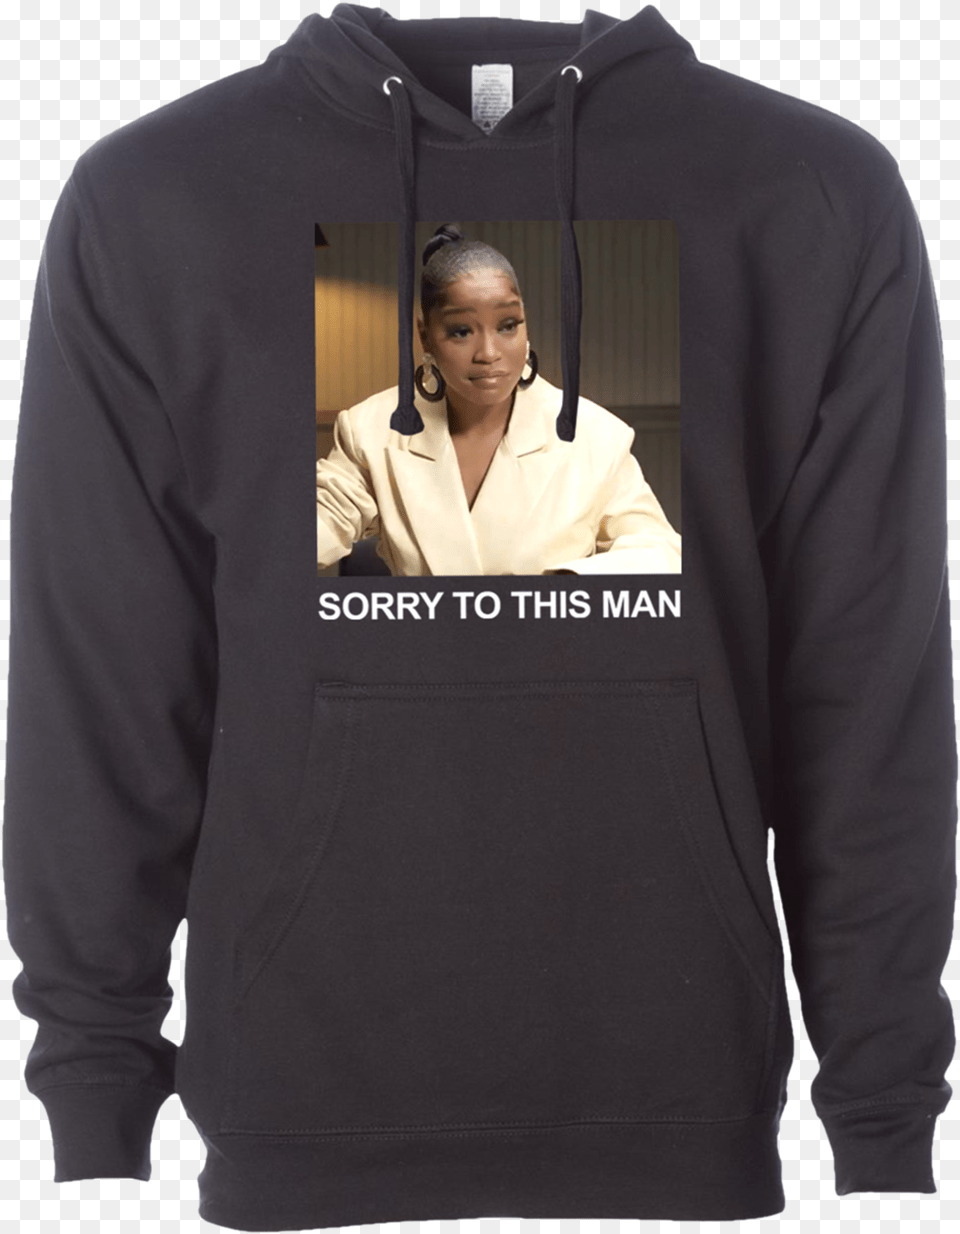 Sorry To This Man Meme, Clothing, Sweater, Knitwear, Hoodie Free Png Download